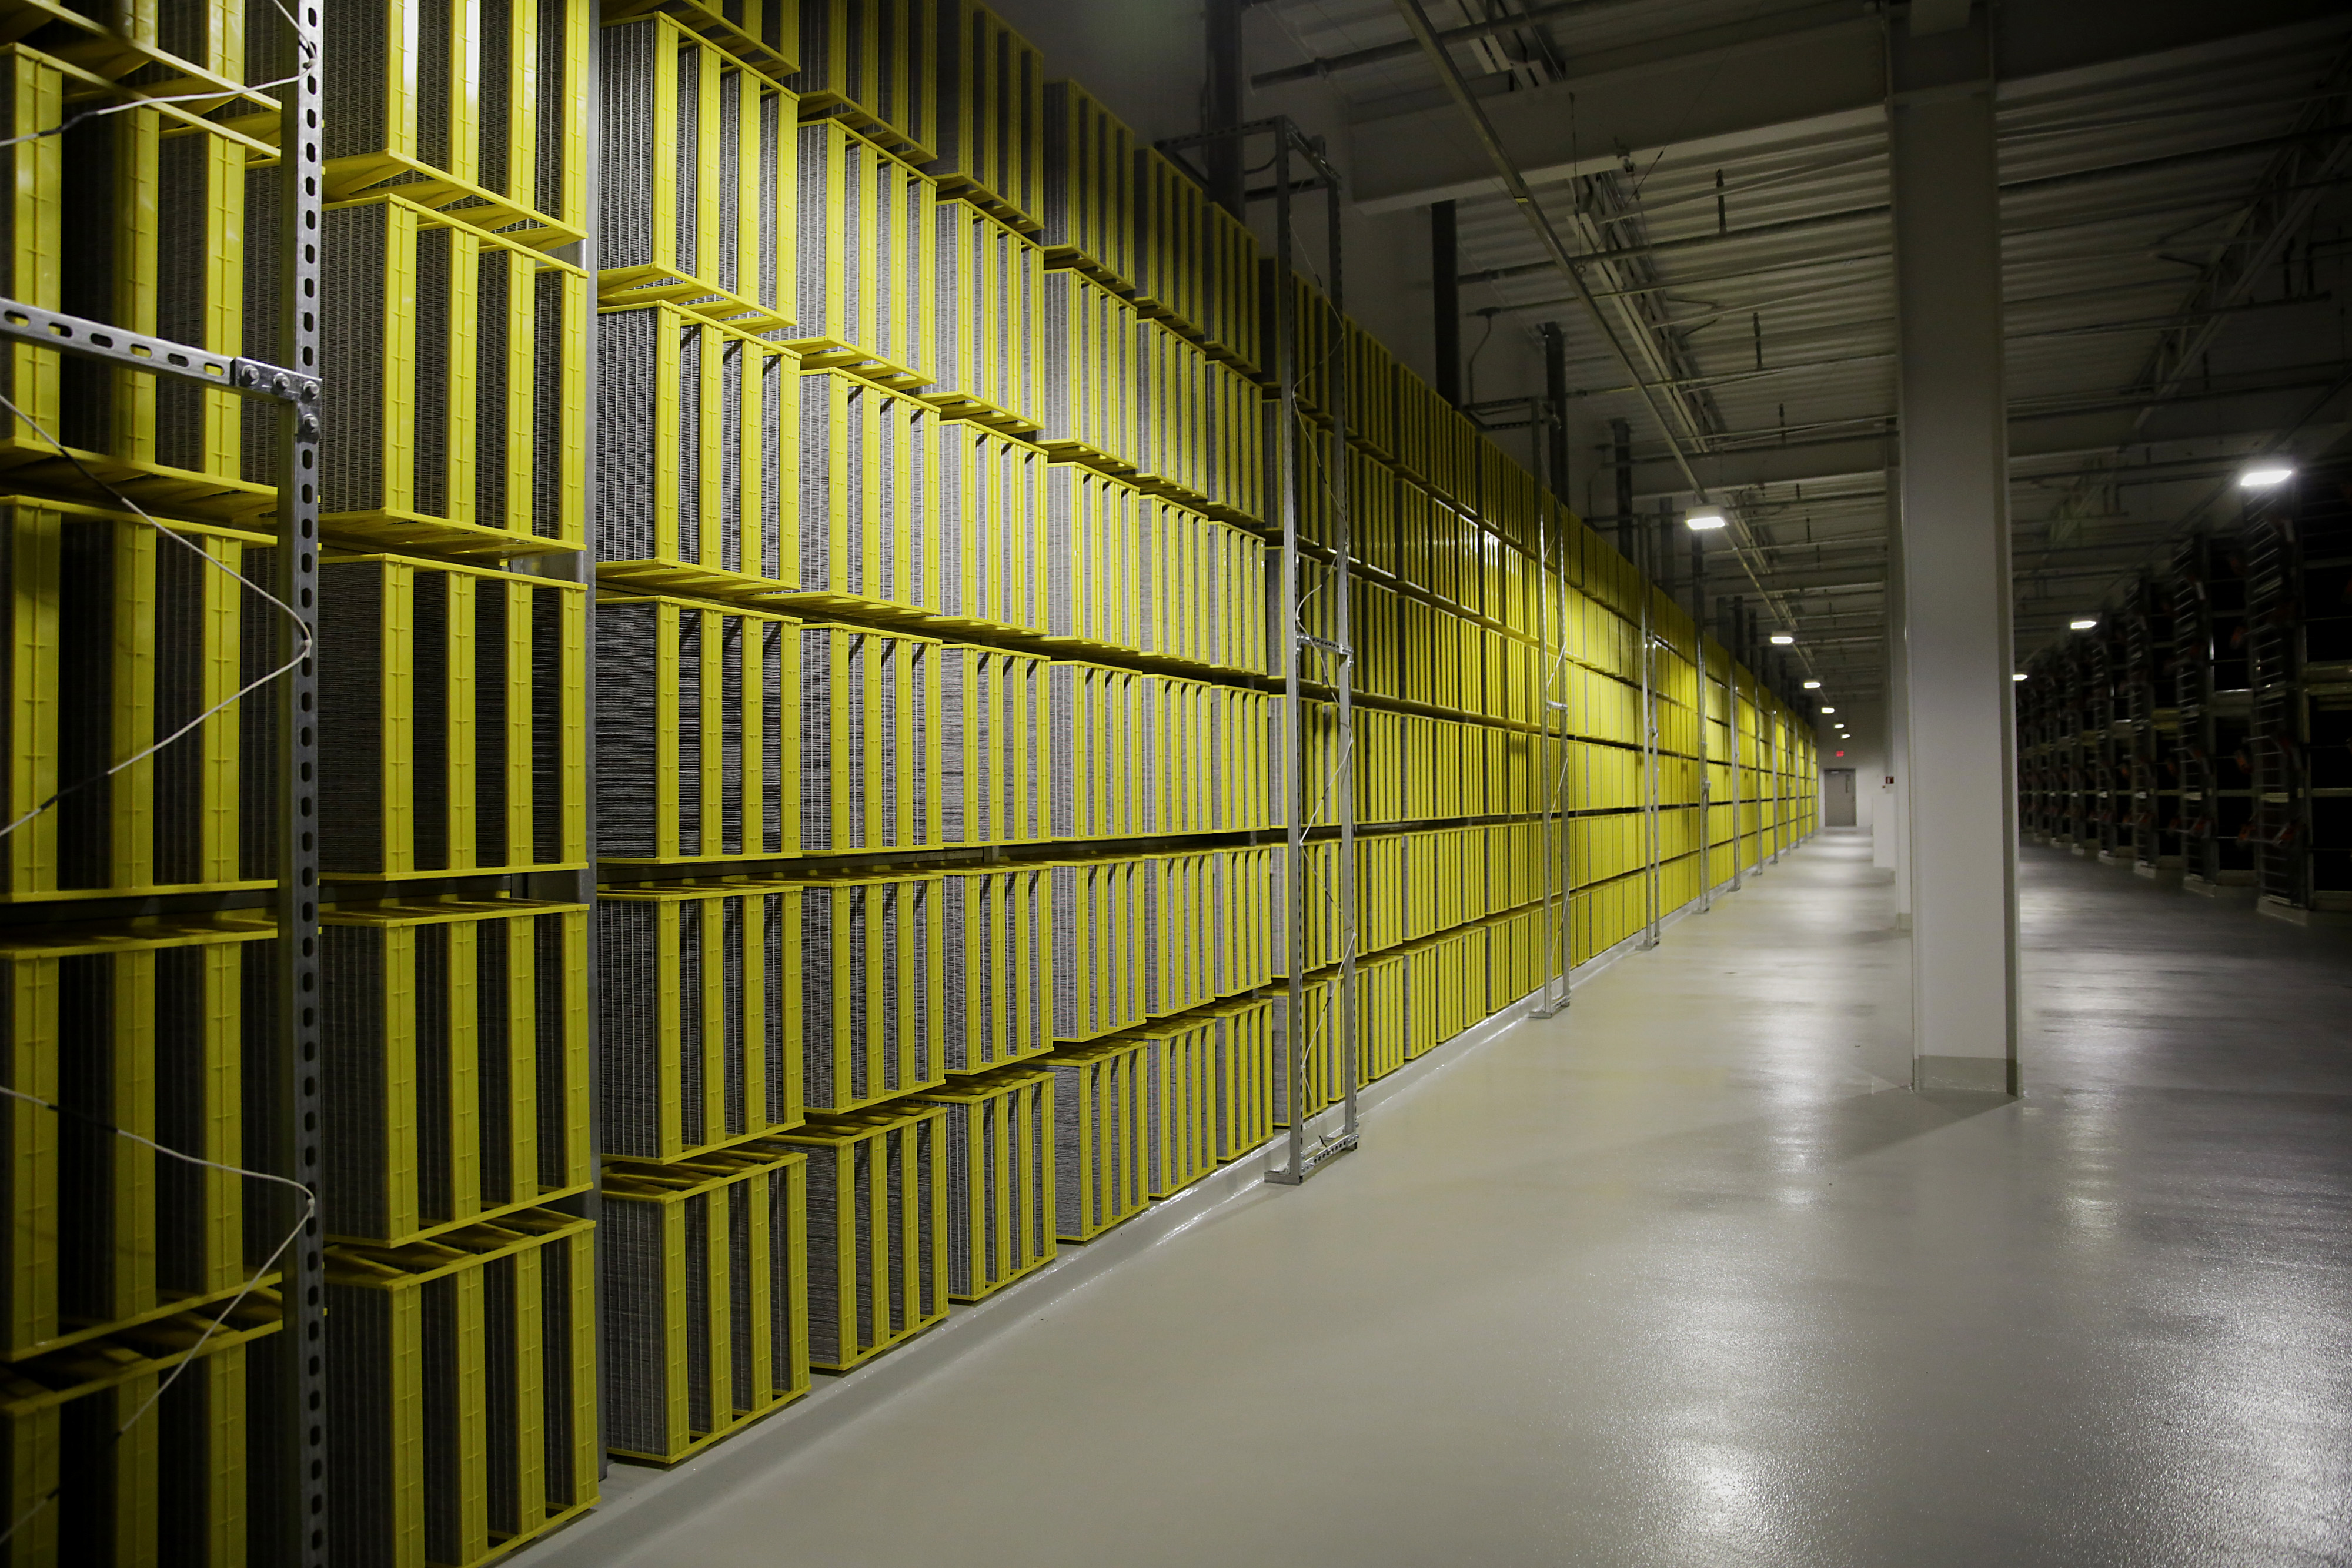 Filters that are part of a cooling system line a room inside the Facebook data center in Prineville, Oregon, in 2014. (Meg Roussos—Bloomberg/Getty Images)